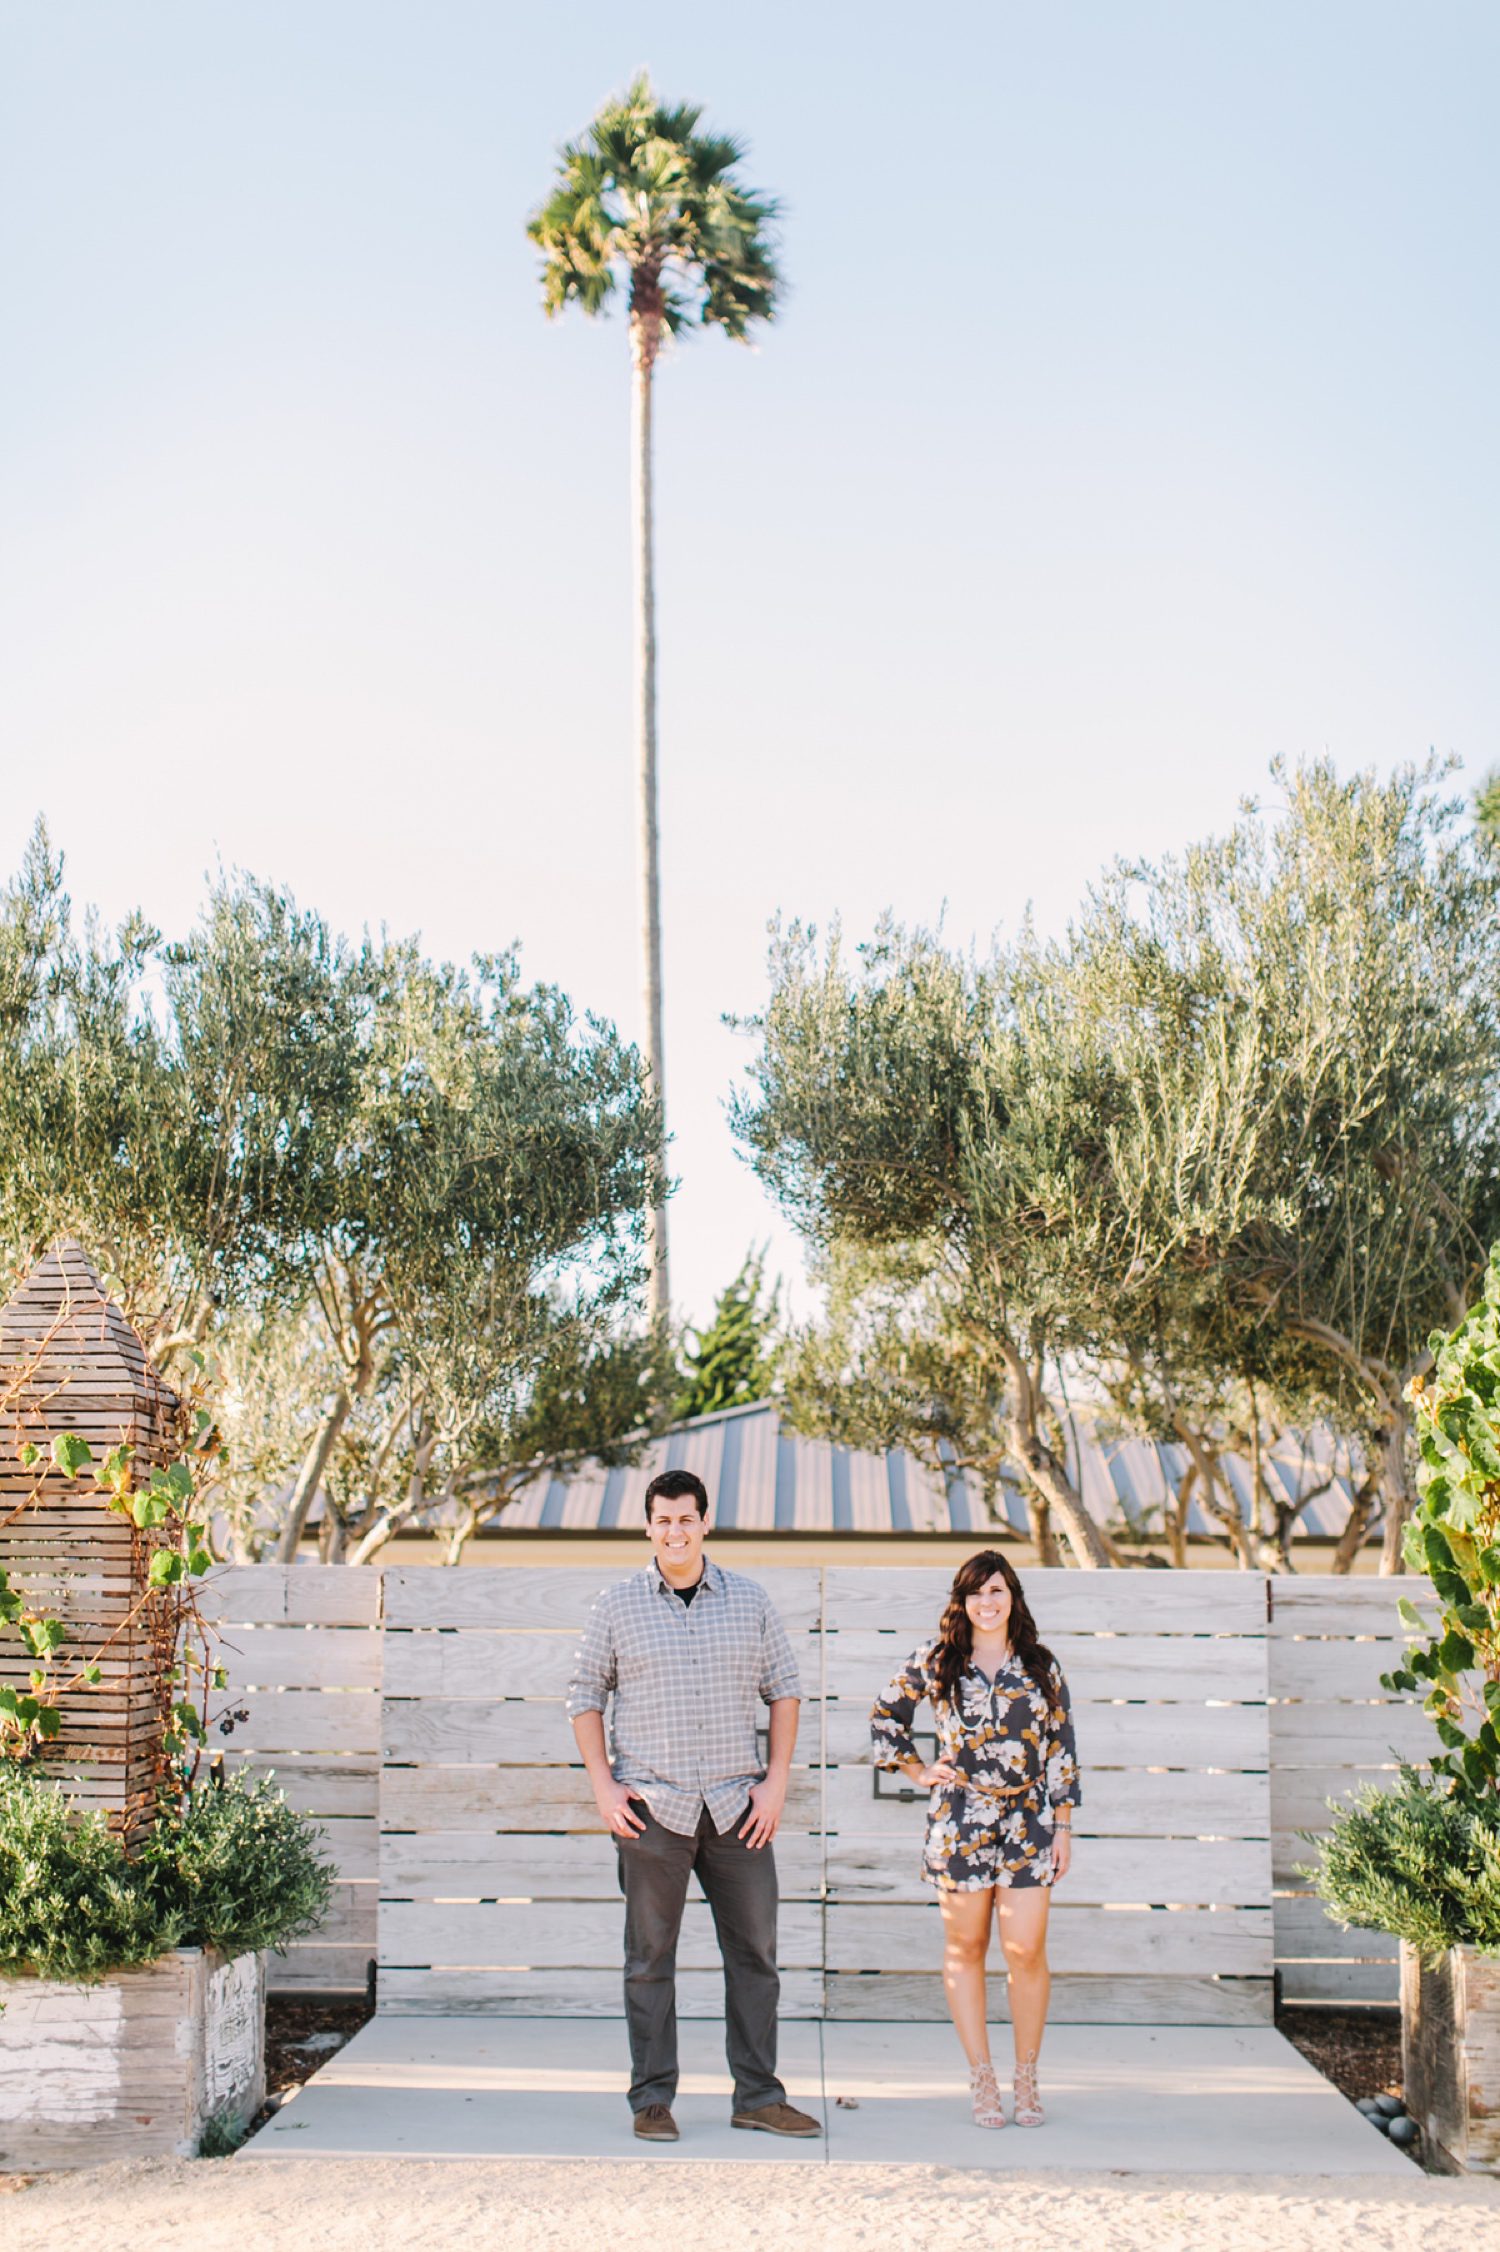 Best San Luis Obispo Wedding Venues Biddle Ranch Winery couple in neutral outfit for engagement session by photographer Jessica Sofranko